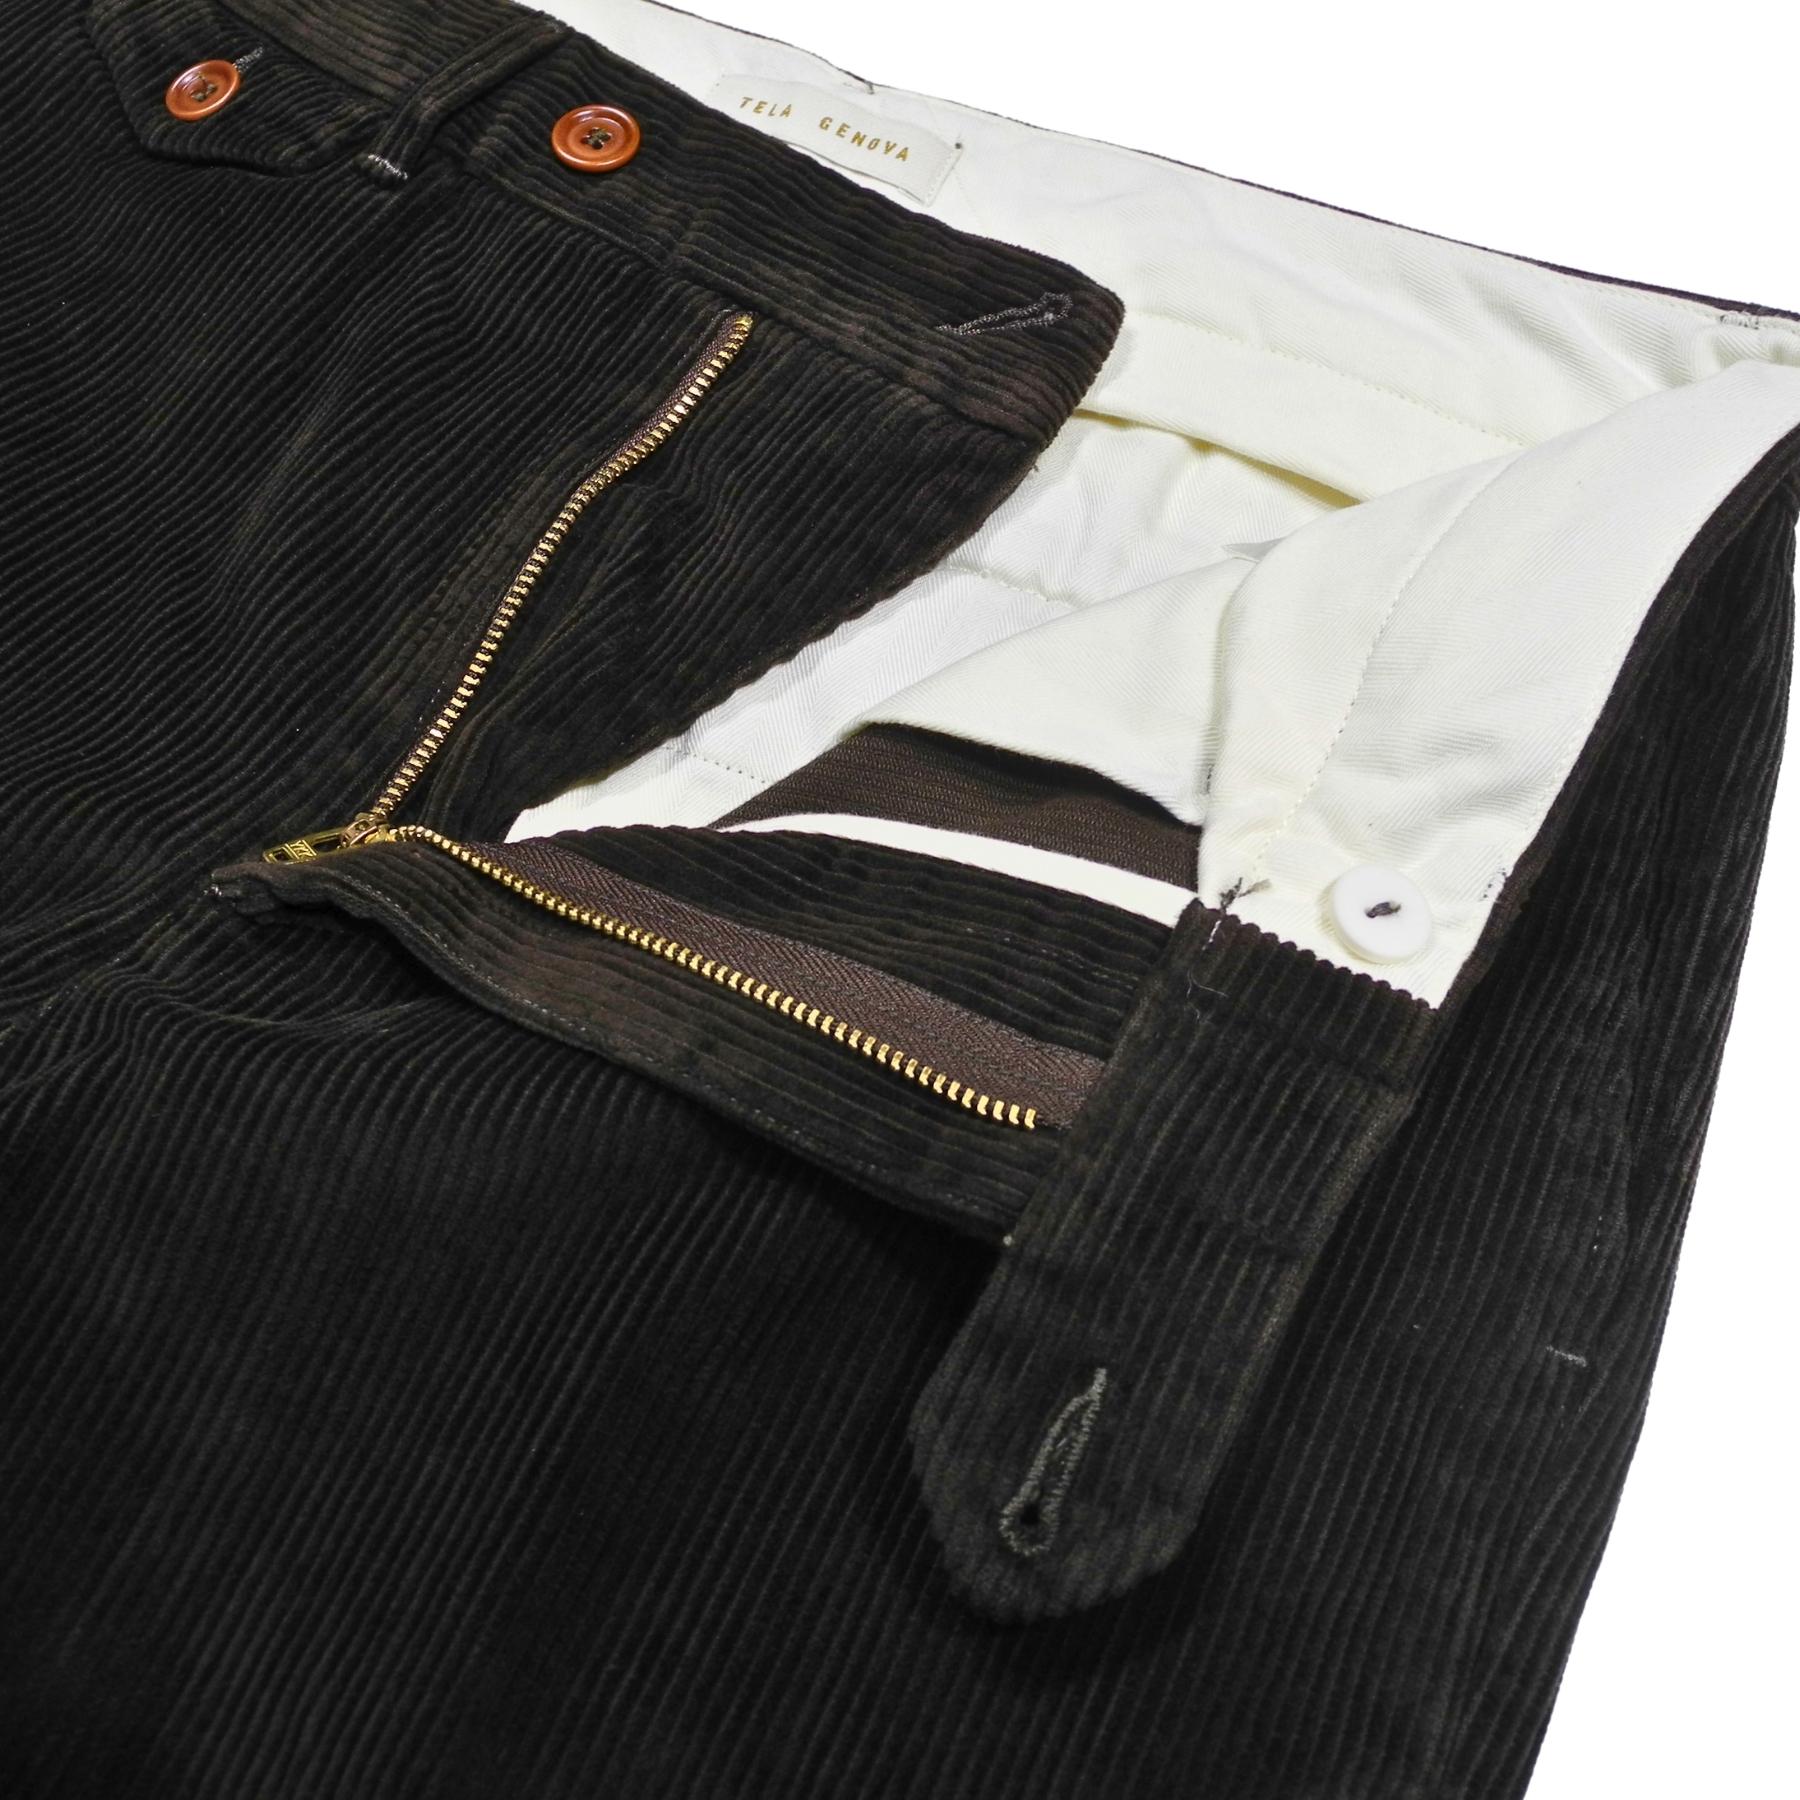 Ribbed trousers in Brown Genoa canvas velvet